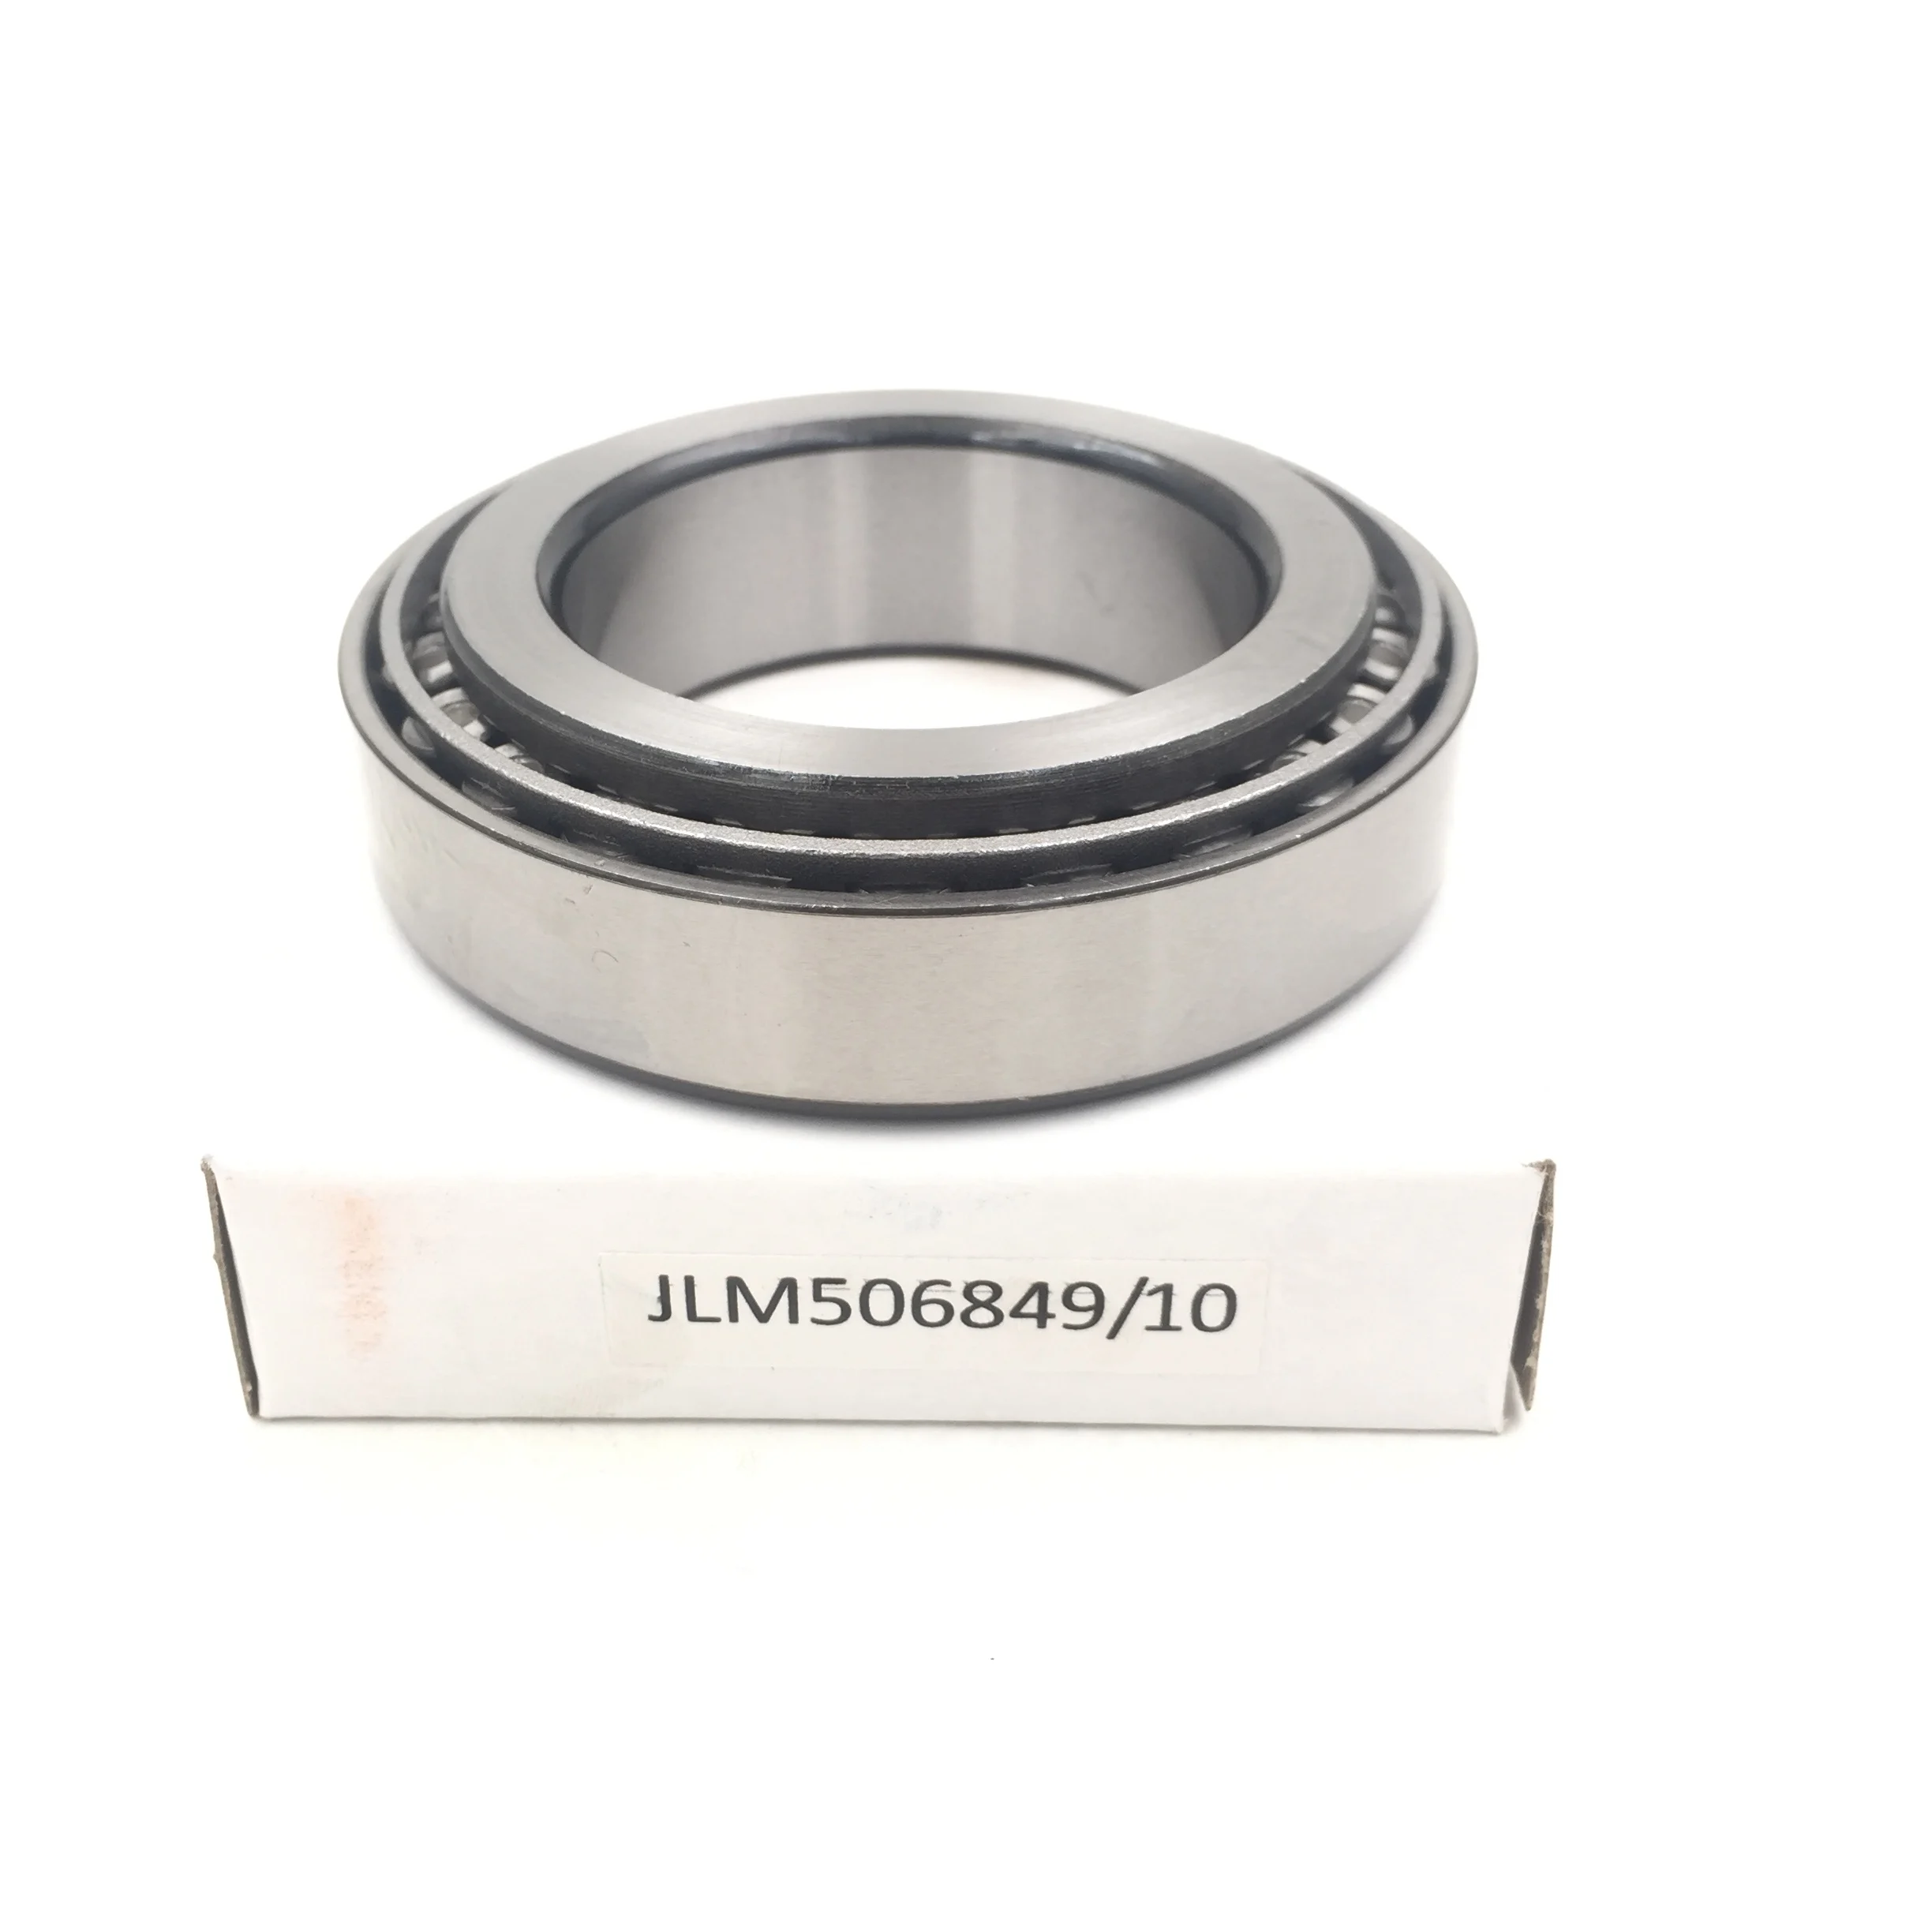 
OEM tapered roller bearing 32310 50*110* 42.25mm china factory tapered roller bearing  (1600066403029)